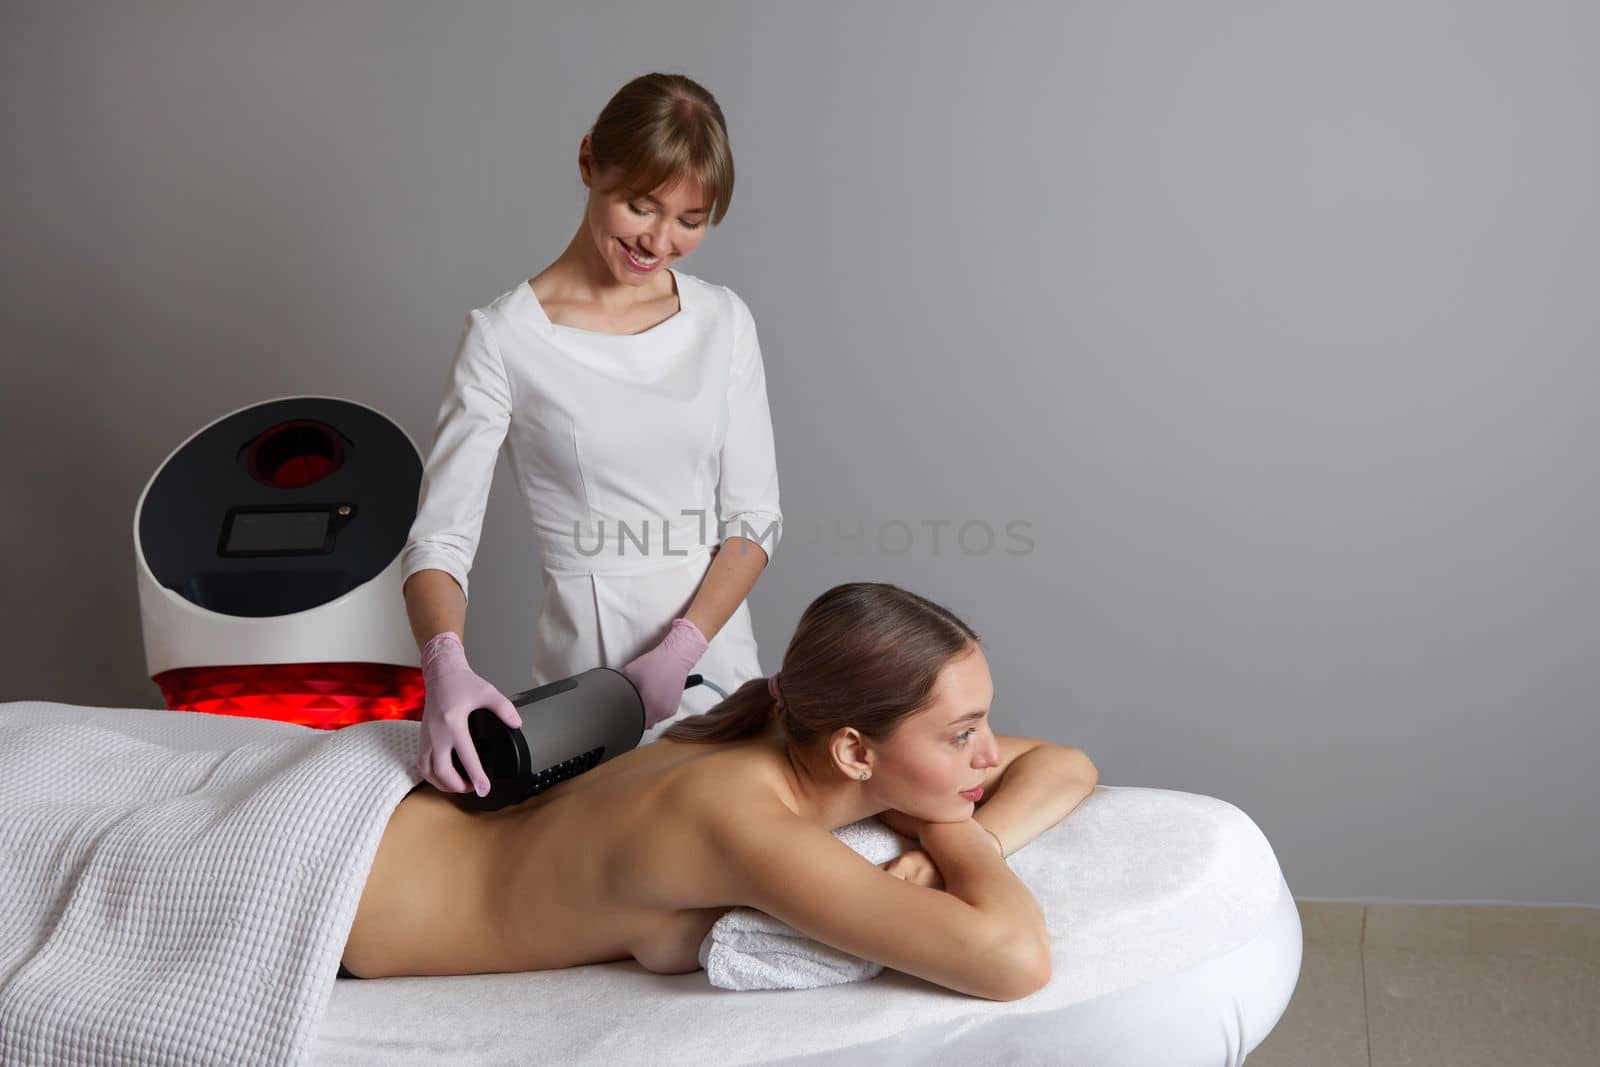 Endosphere therapy of female body by cosmetologist in beauty salon by Mariakray